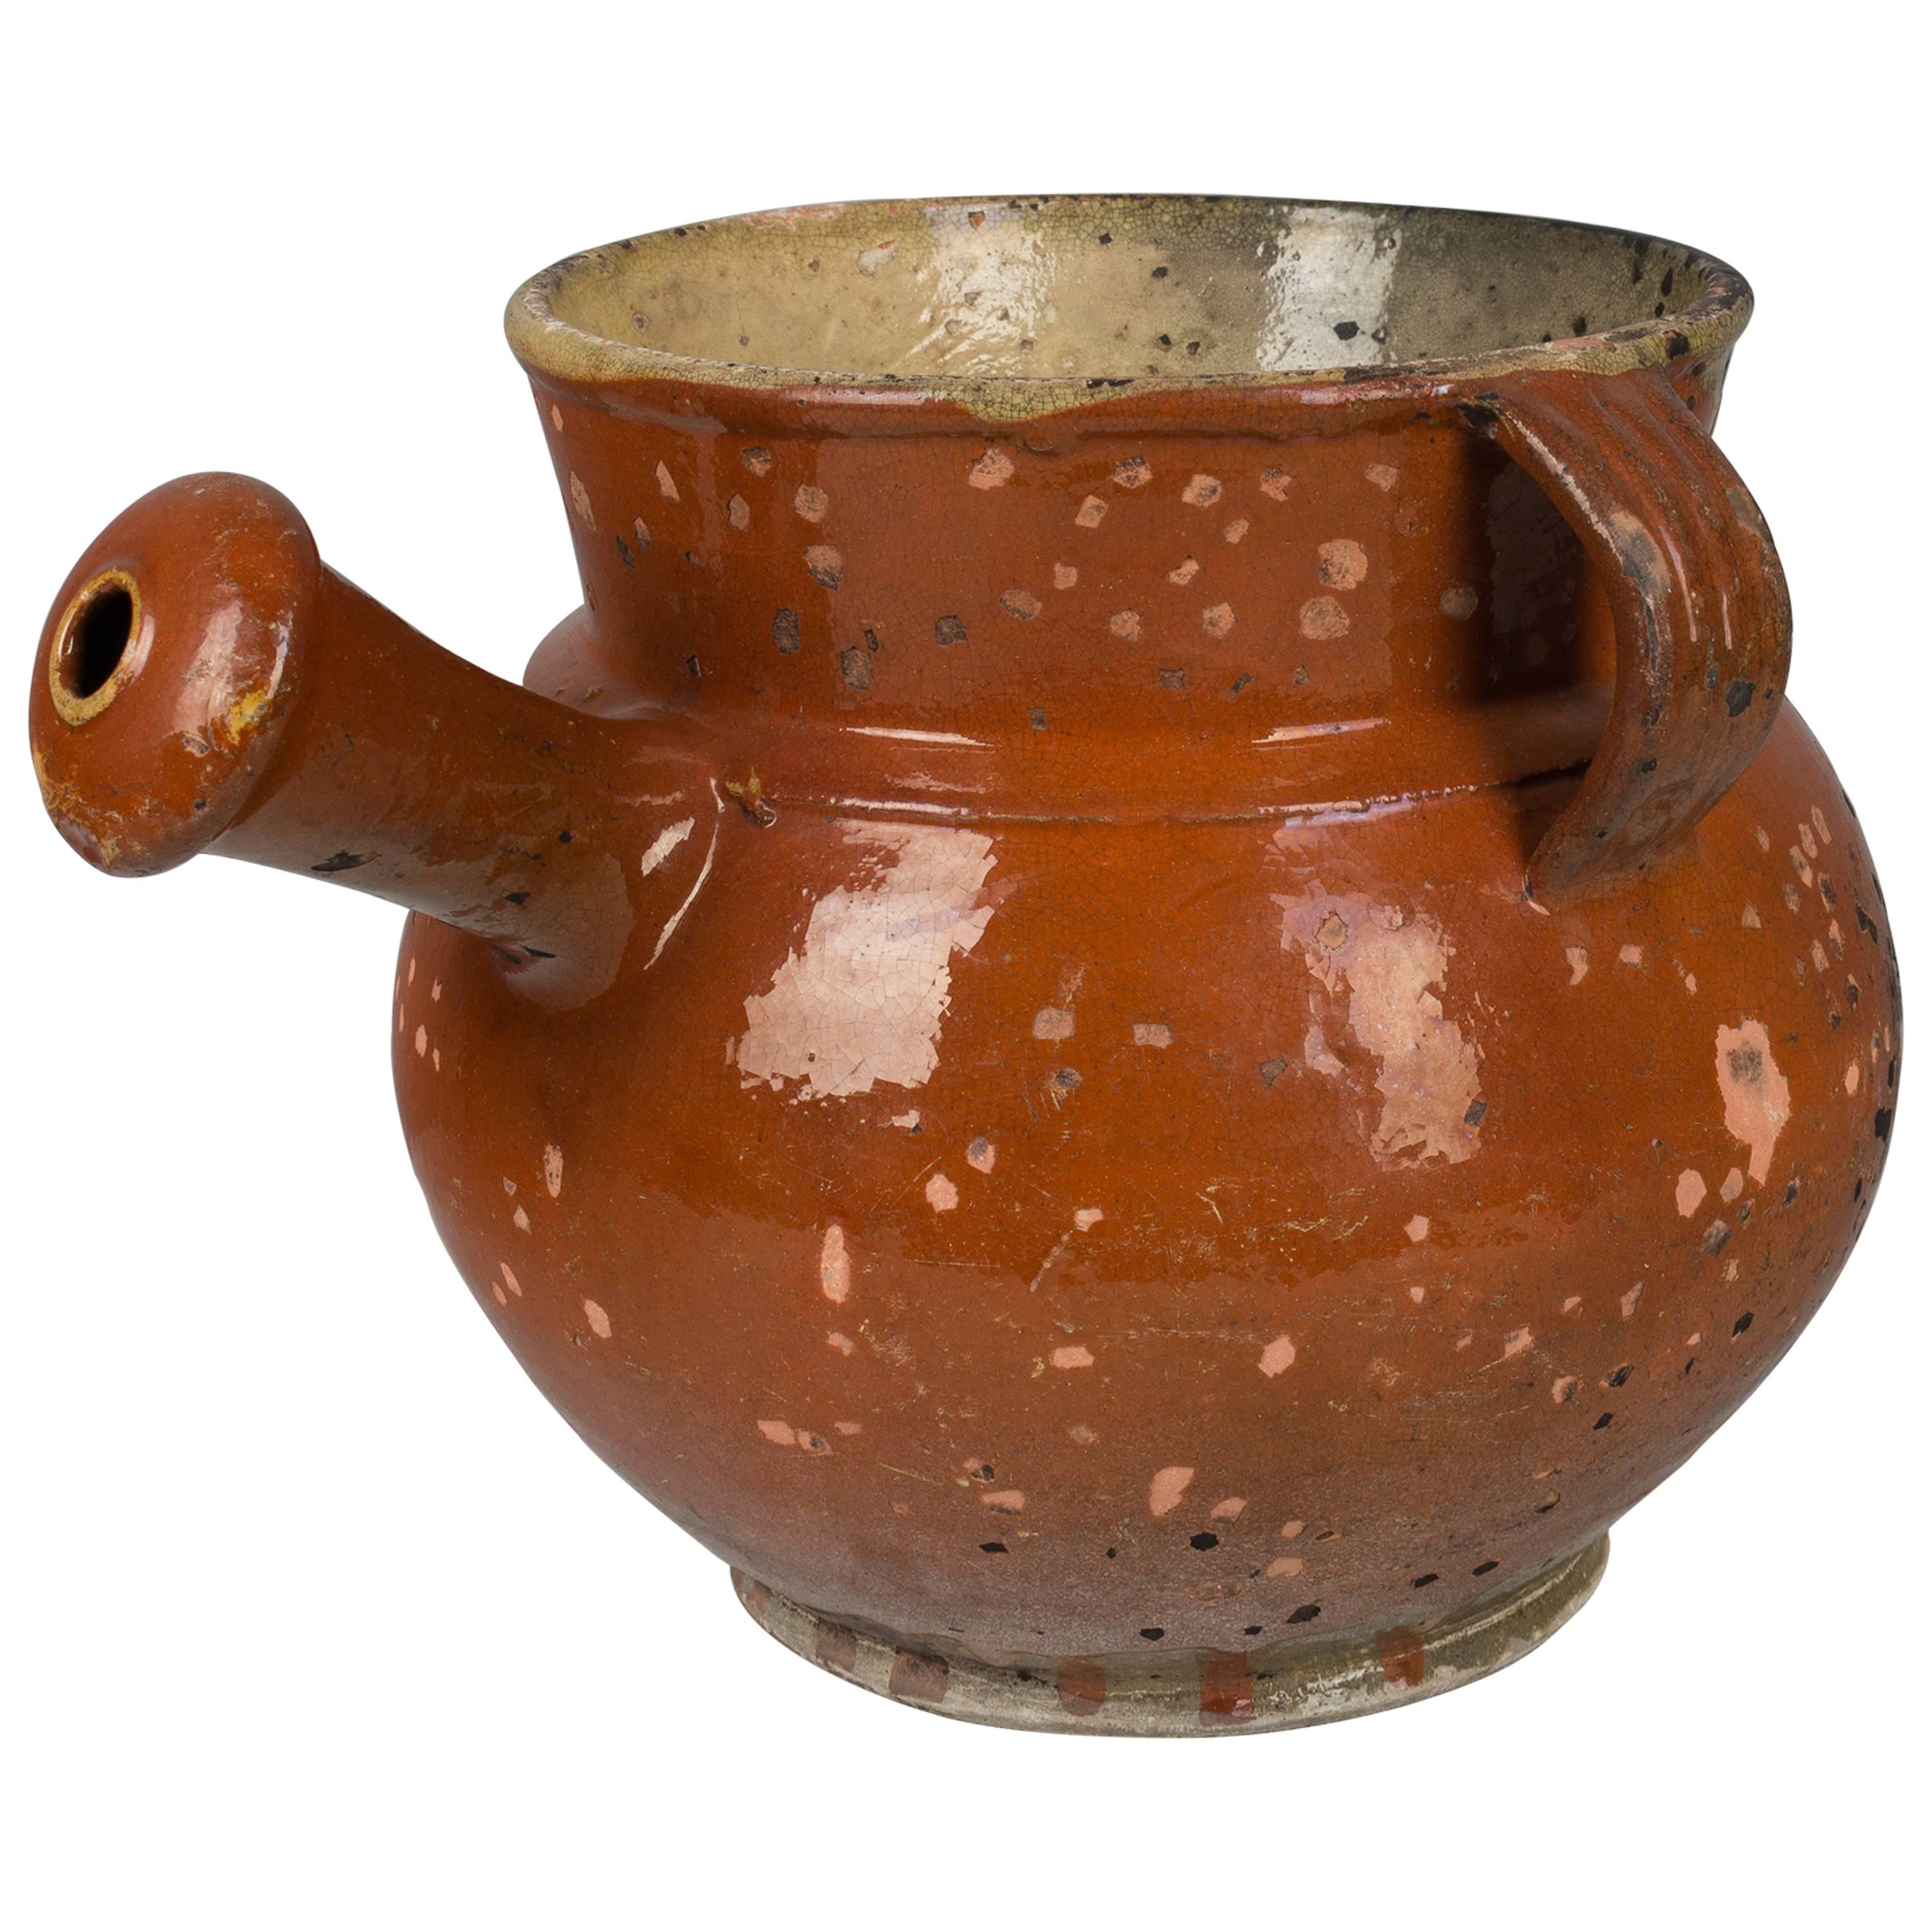 A 19th century, French glazed terracotta pot with two small handles on either side and a large handle that looks like a spout. Beautiful color and patina. Please refer to photos for more details.  Please refer to photos for more details. Pictures